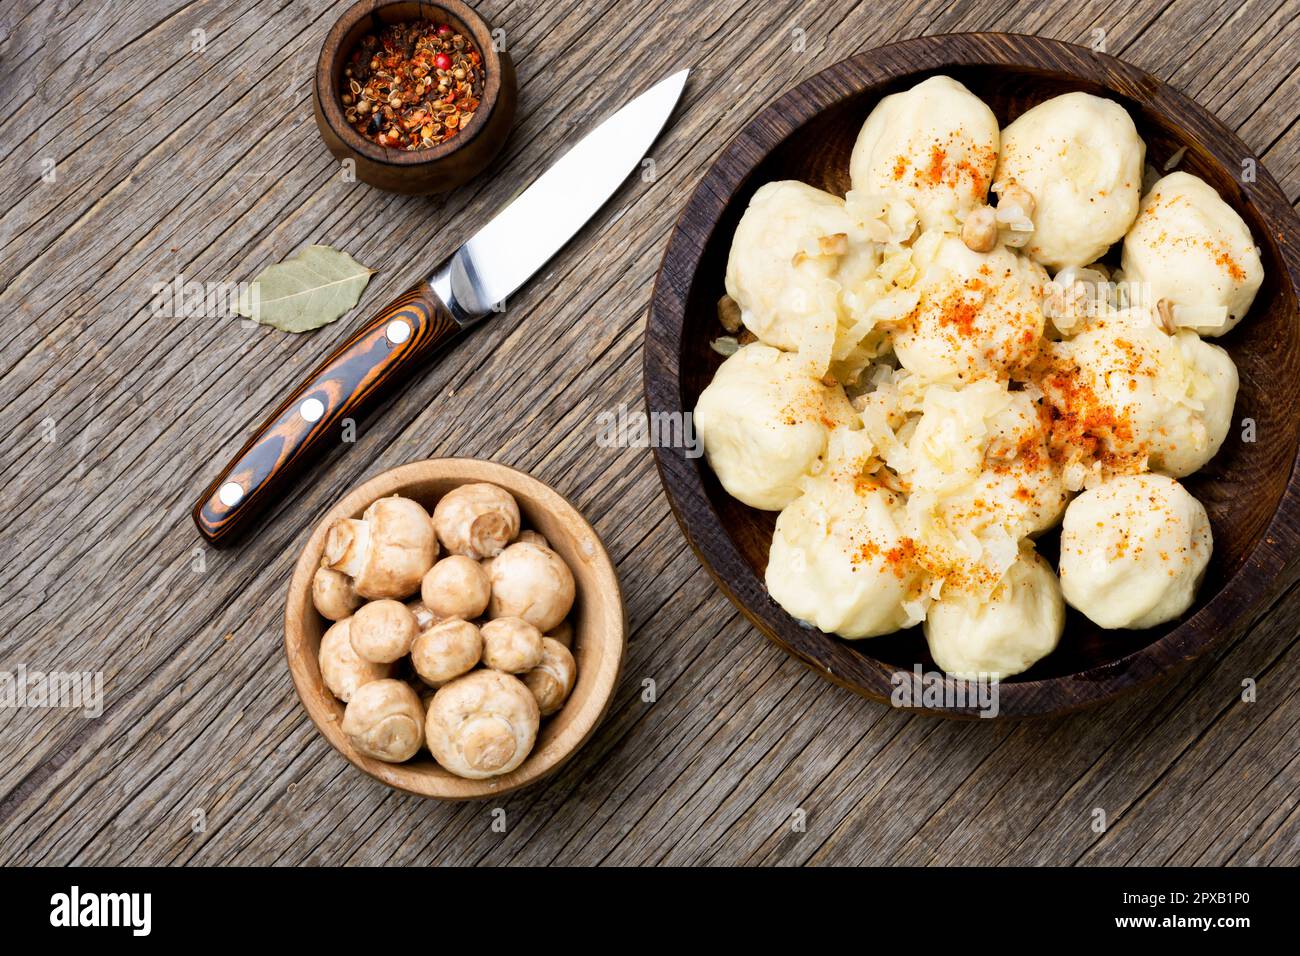 Uncooked knedliks, made from dough, potatoes with mushroom filling. National dish of Czech and Slovak cuisine Stock Photo